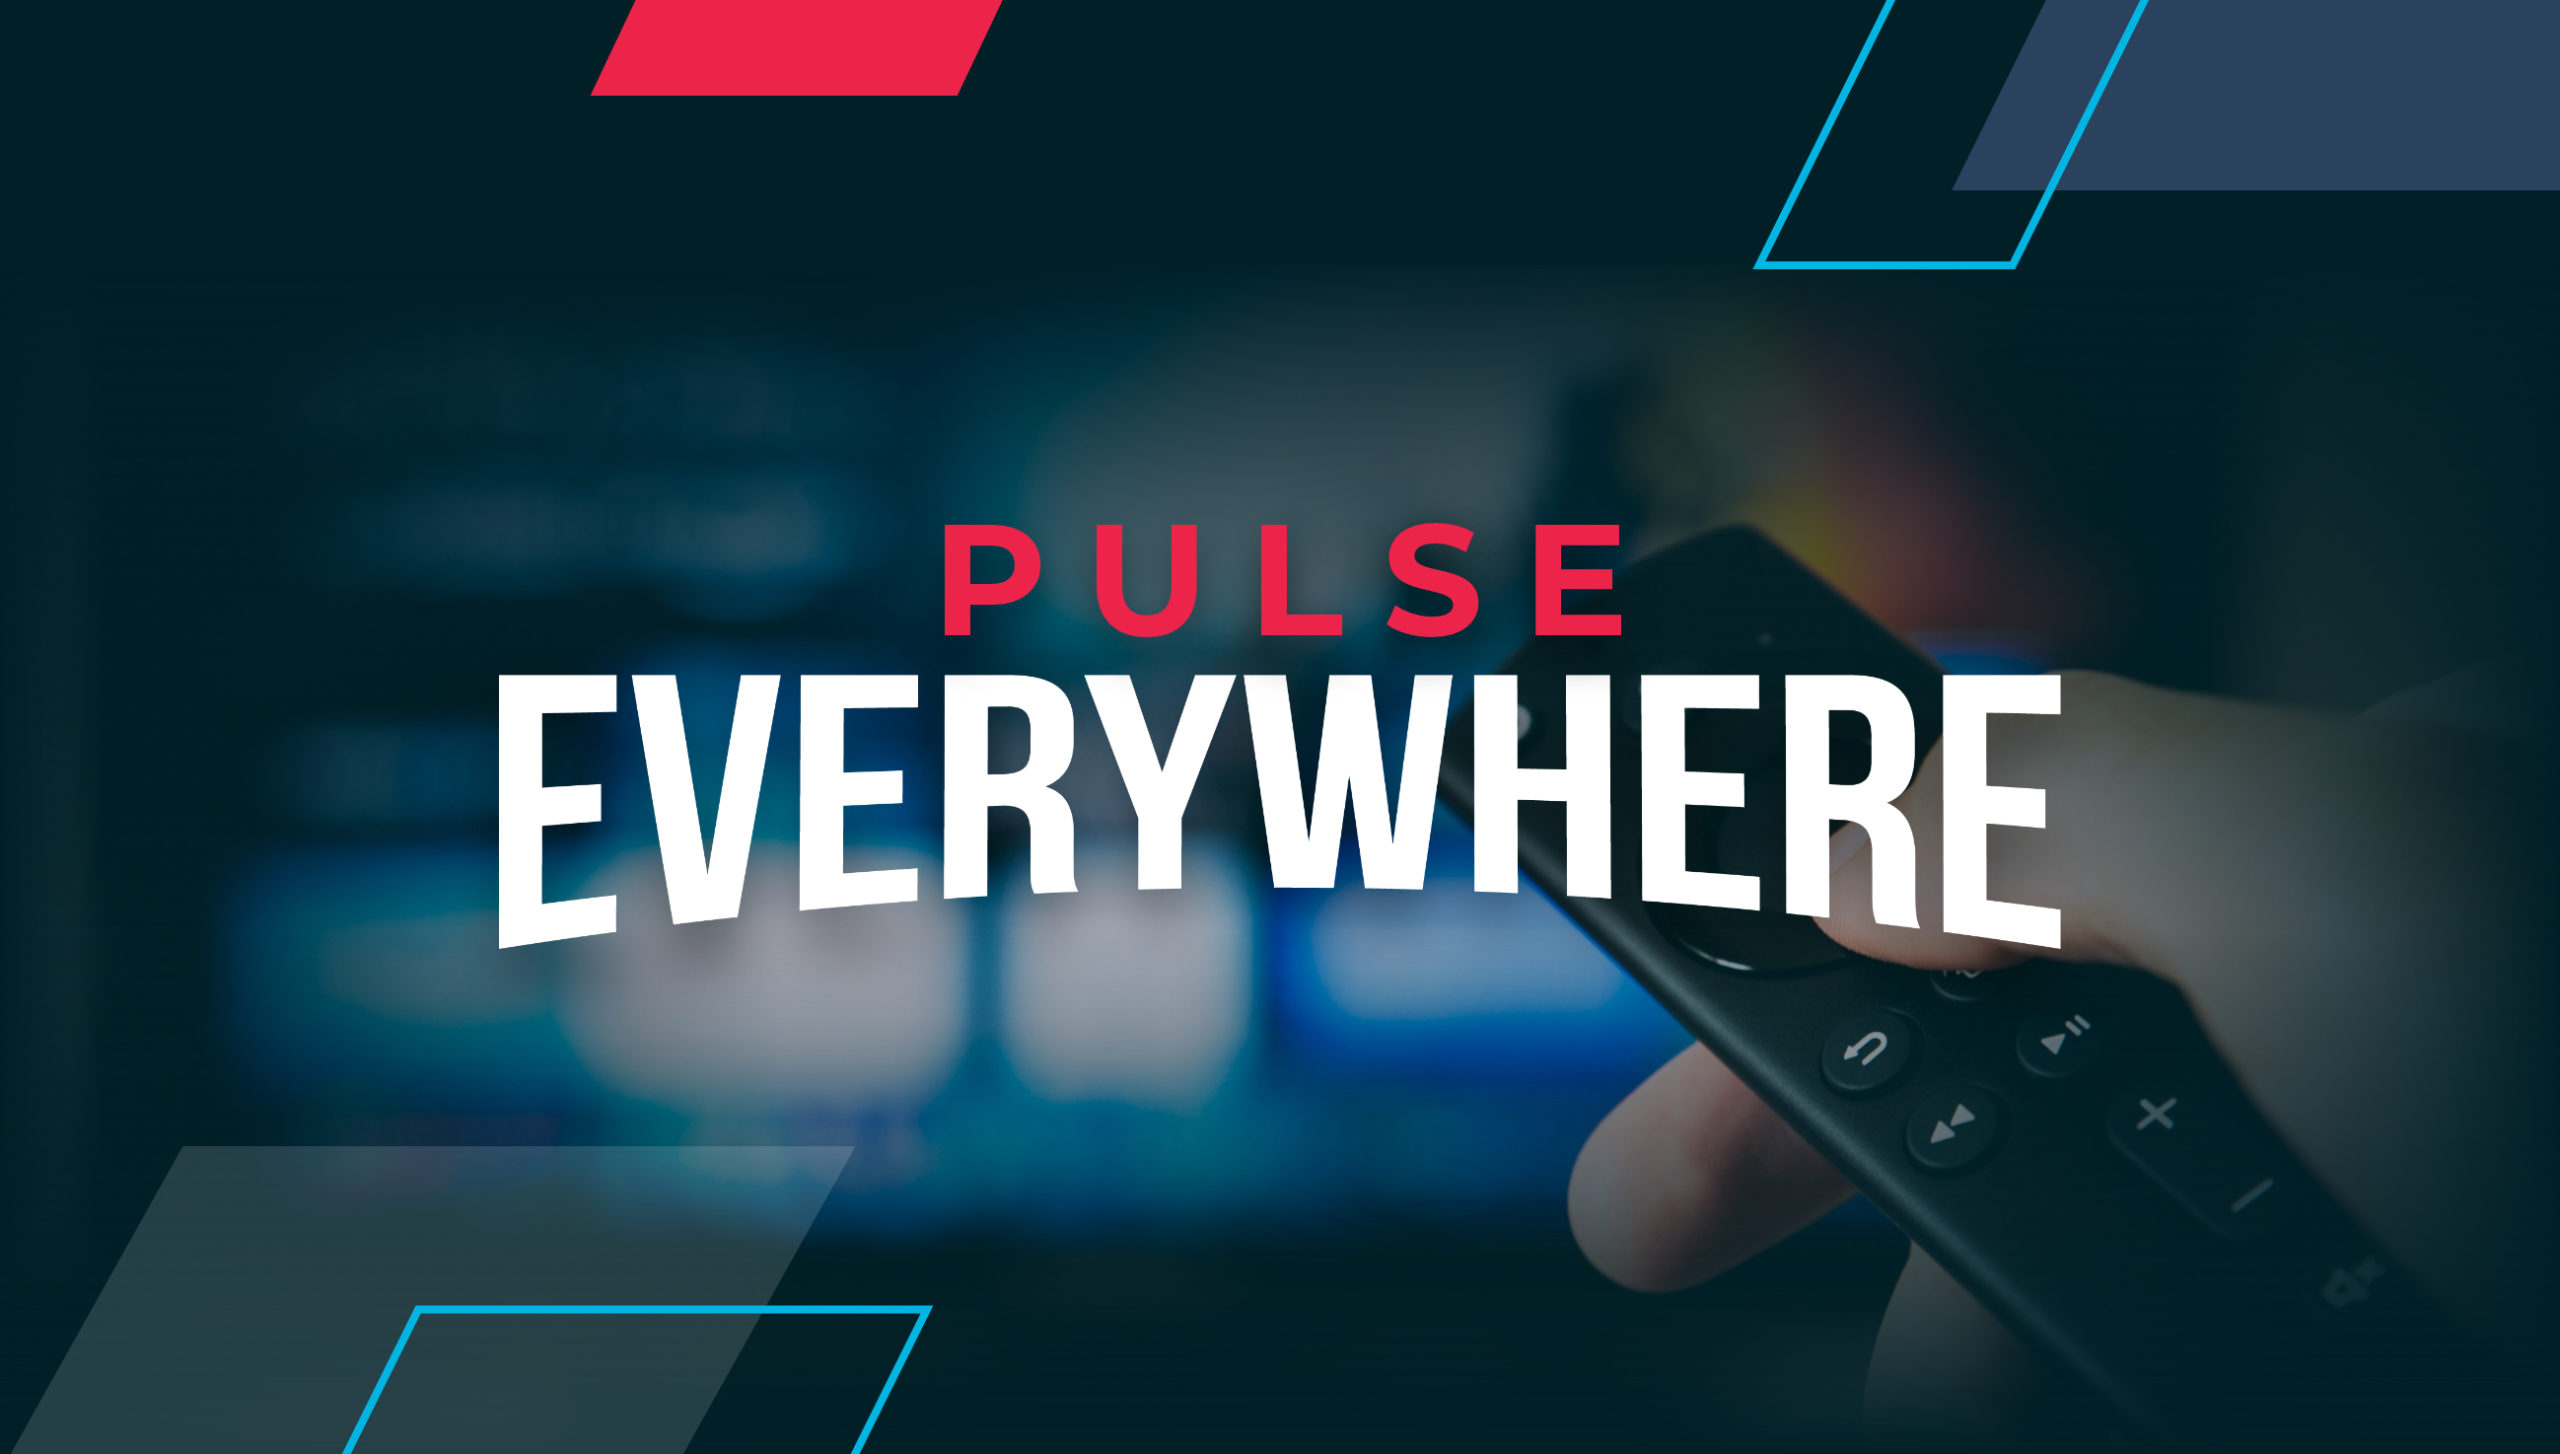 The Journey to Hybrid: 20+ Things We Learned Transforming Pulse Everywhere Image